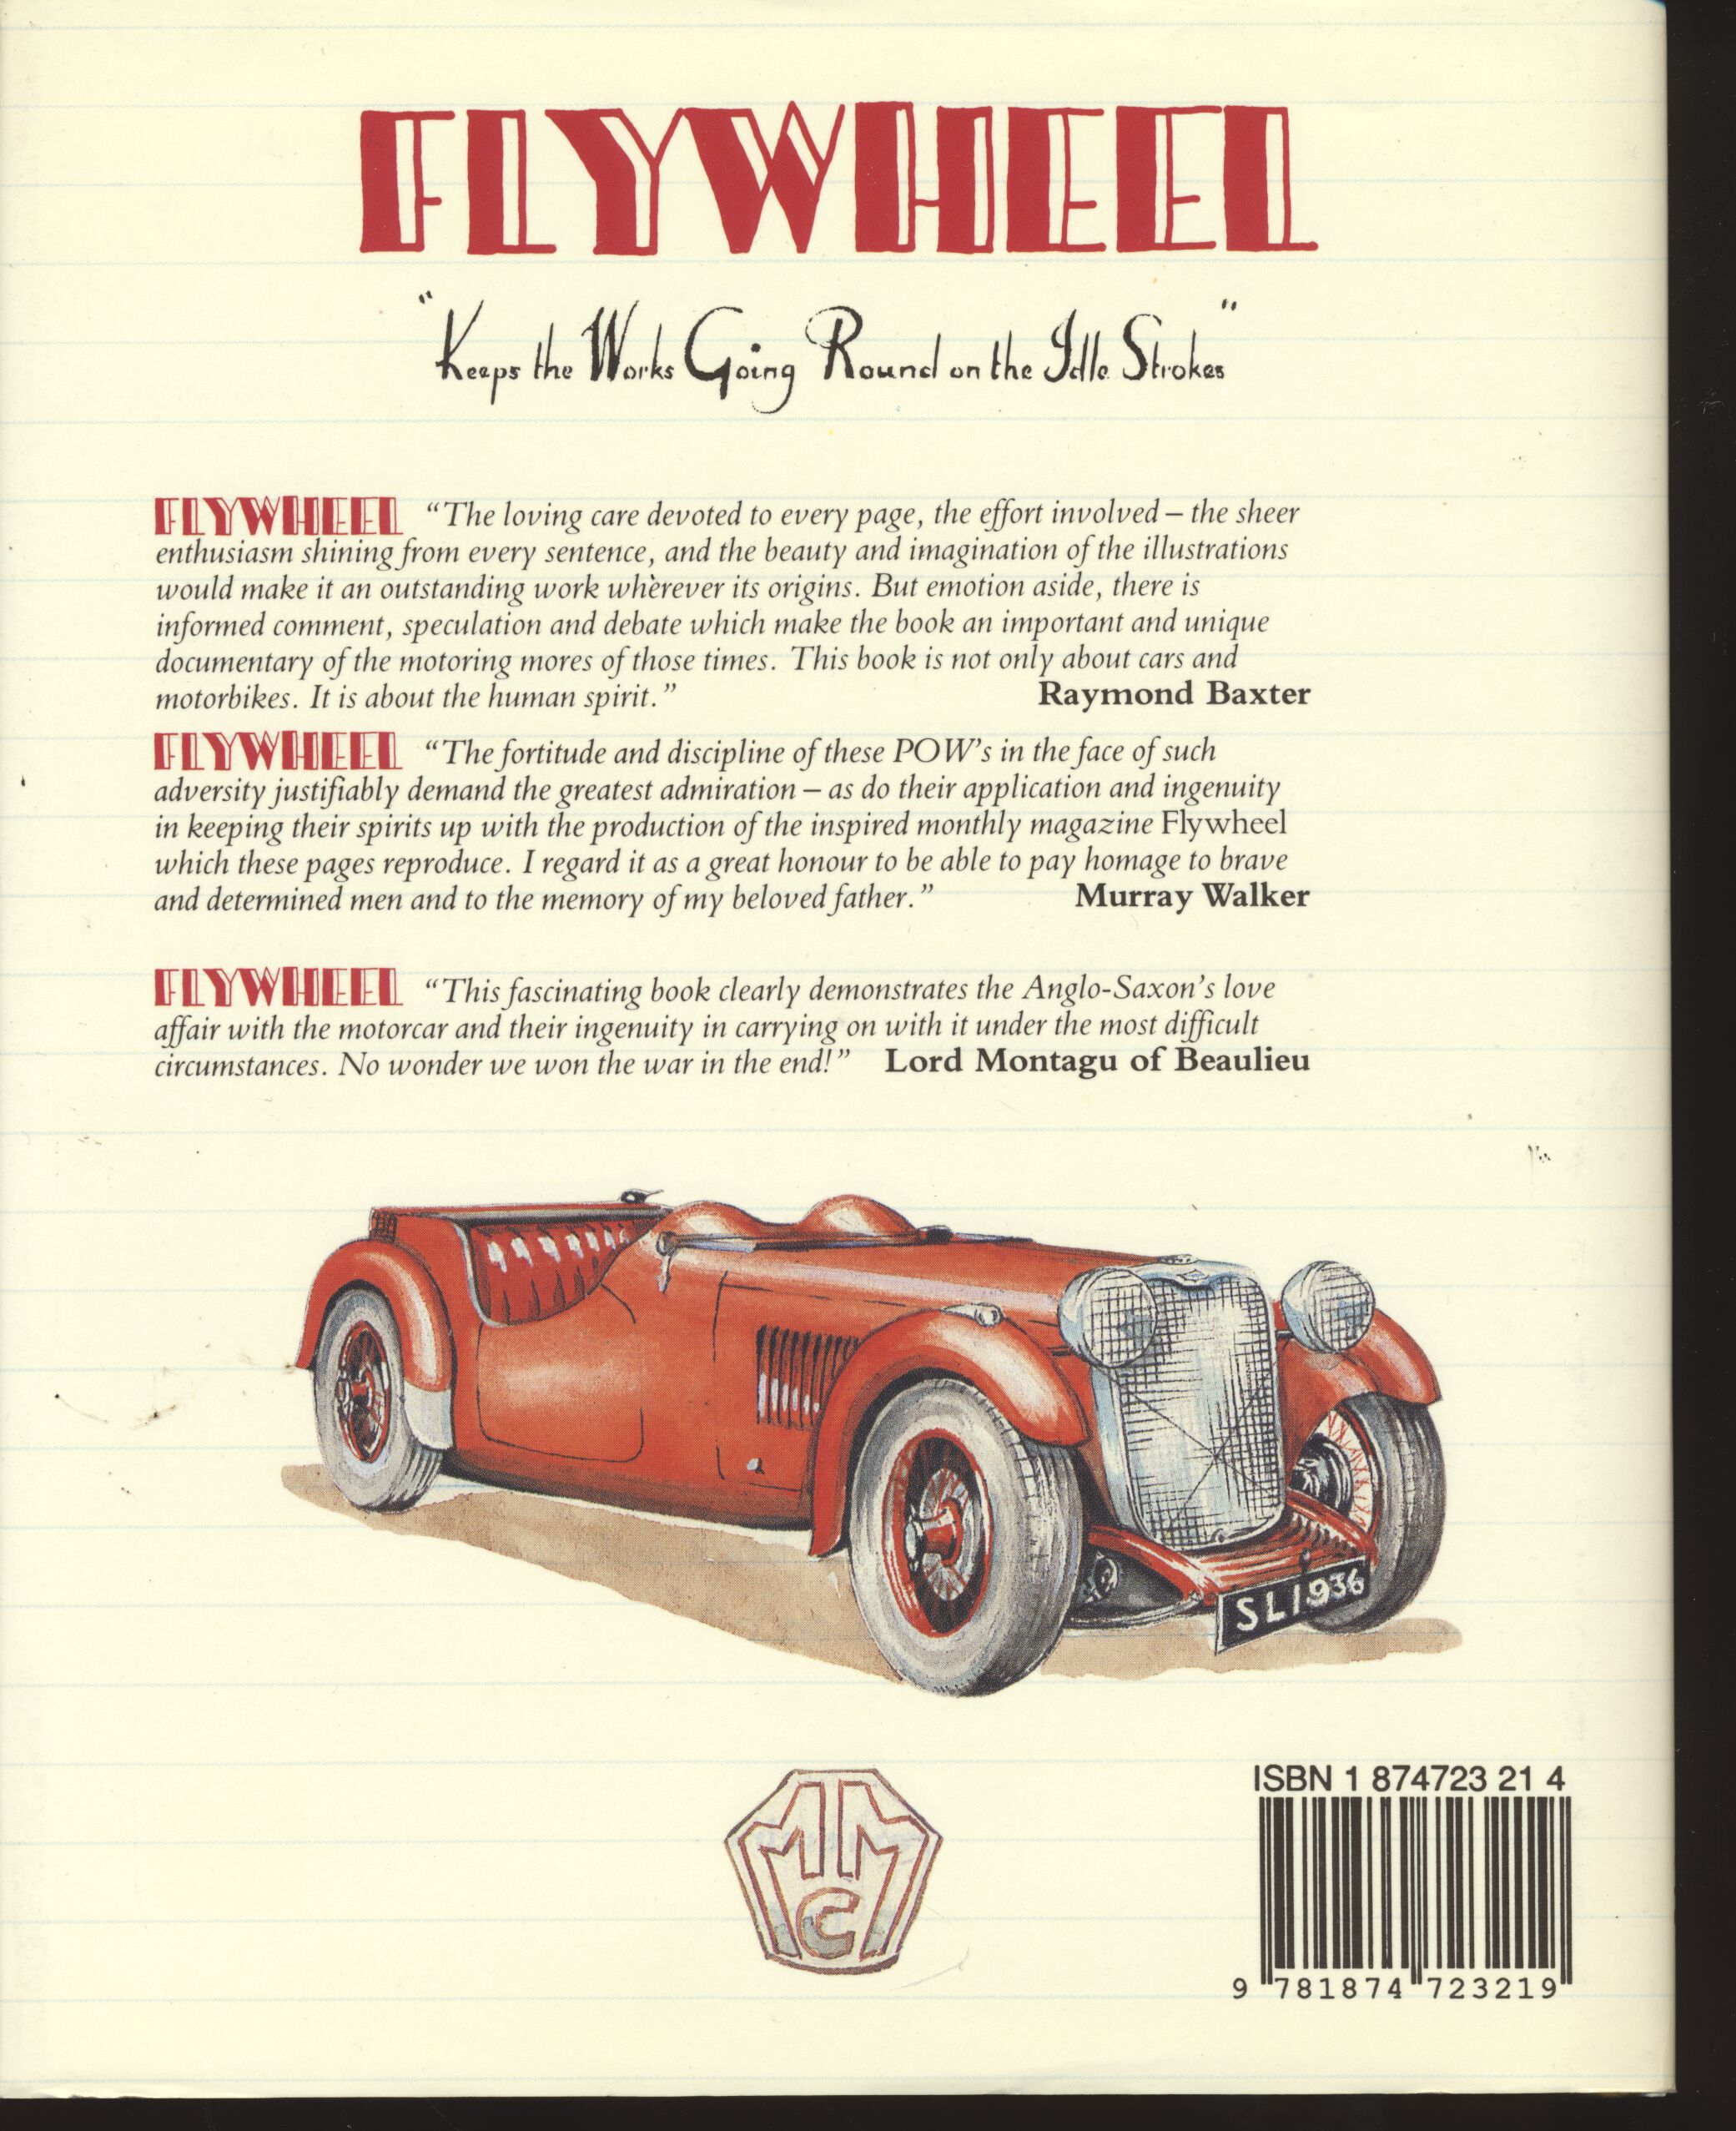 Flywheel - Memories  of the Open Road - Tom Swallow and Arthur H Pill